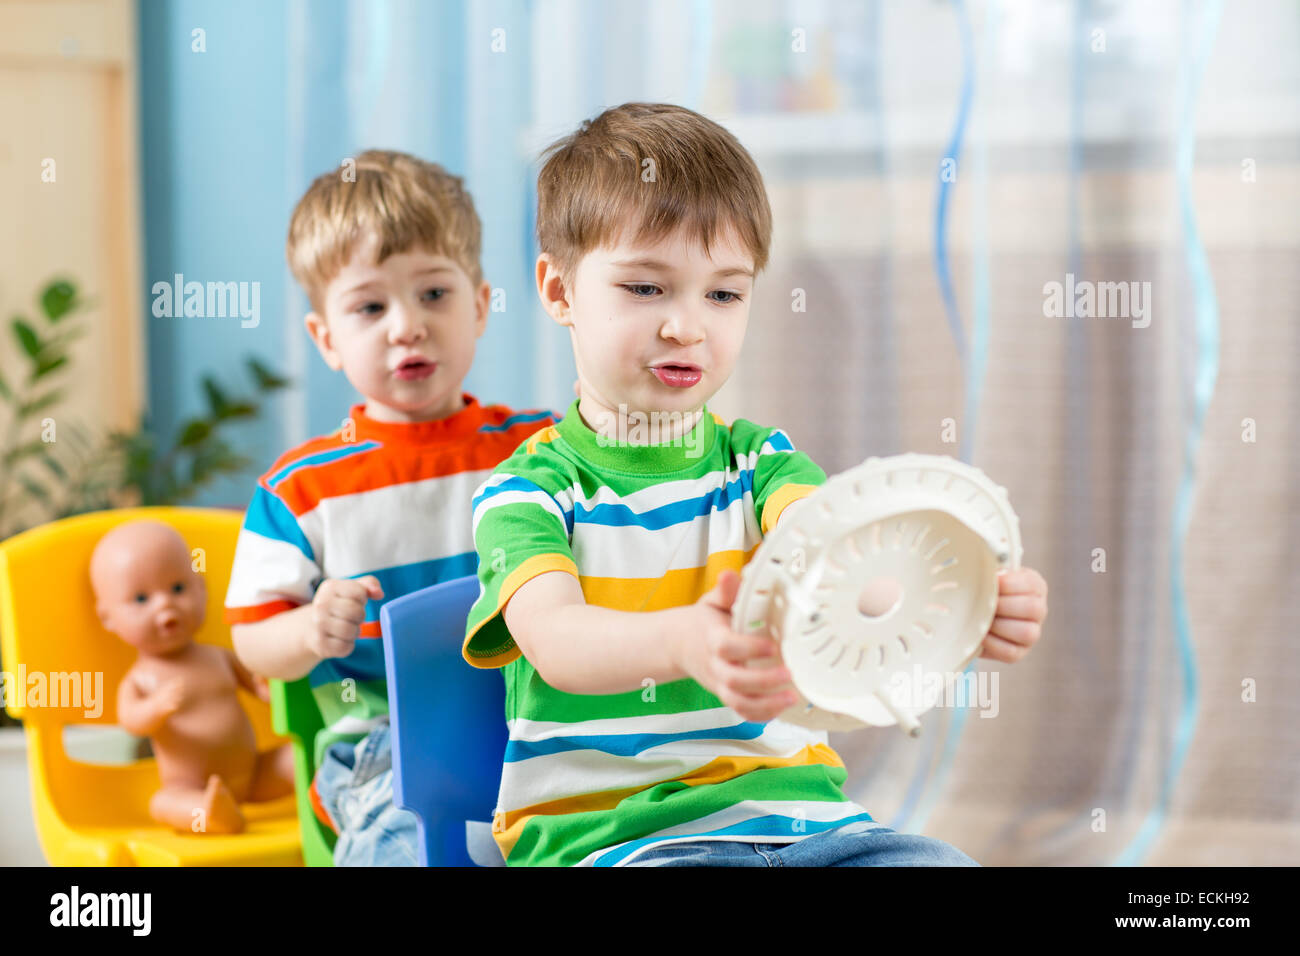 kids boys playing role game and riding on carriages made from chairs Stock Photo